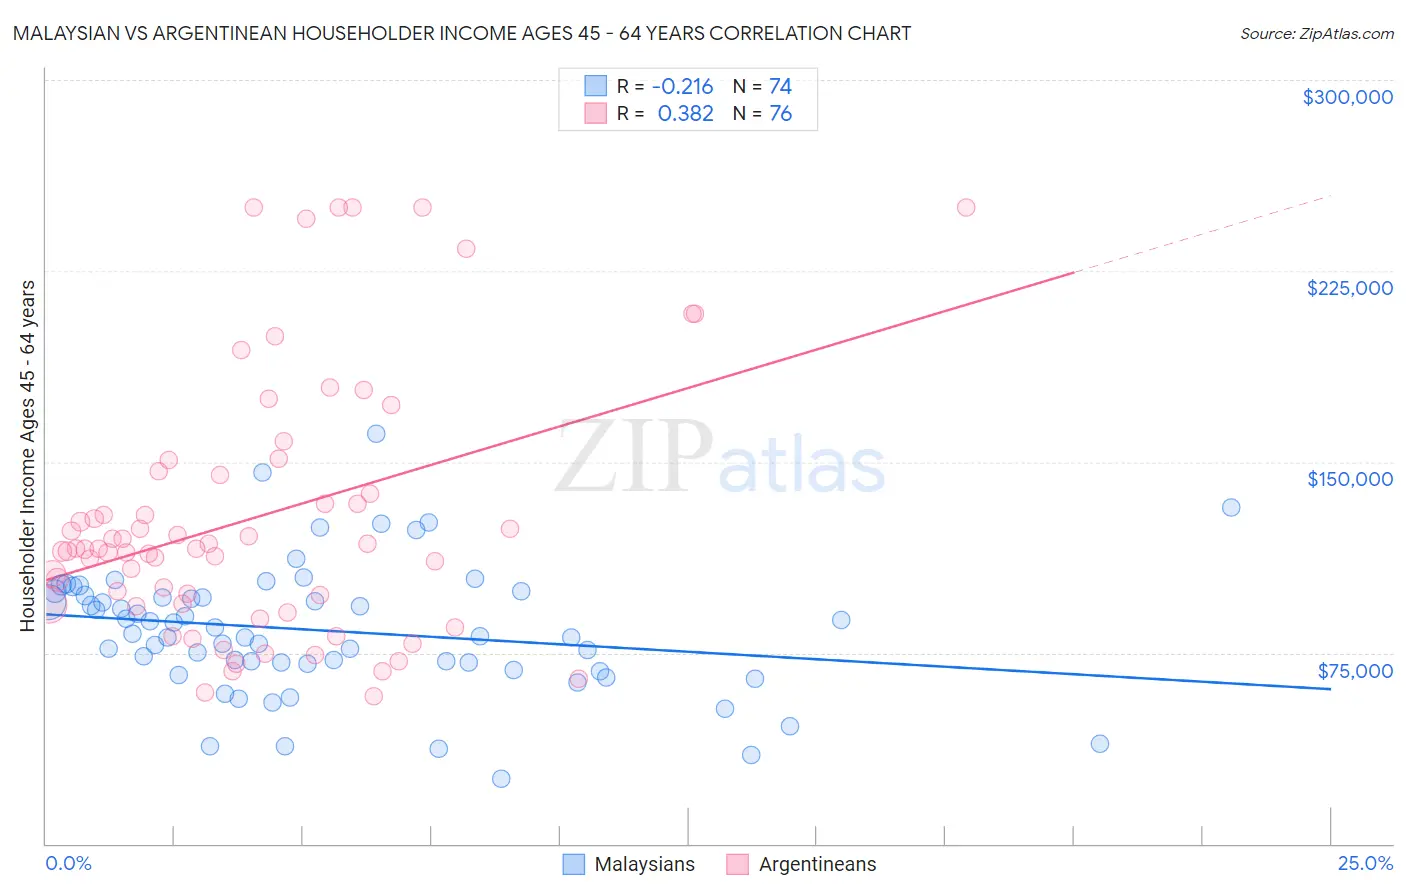 Malaysian vs Argentinean Householder Income Ages 45 - 64 years